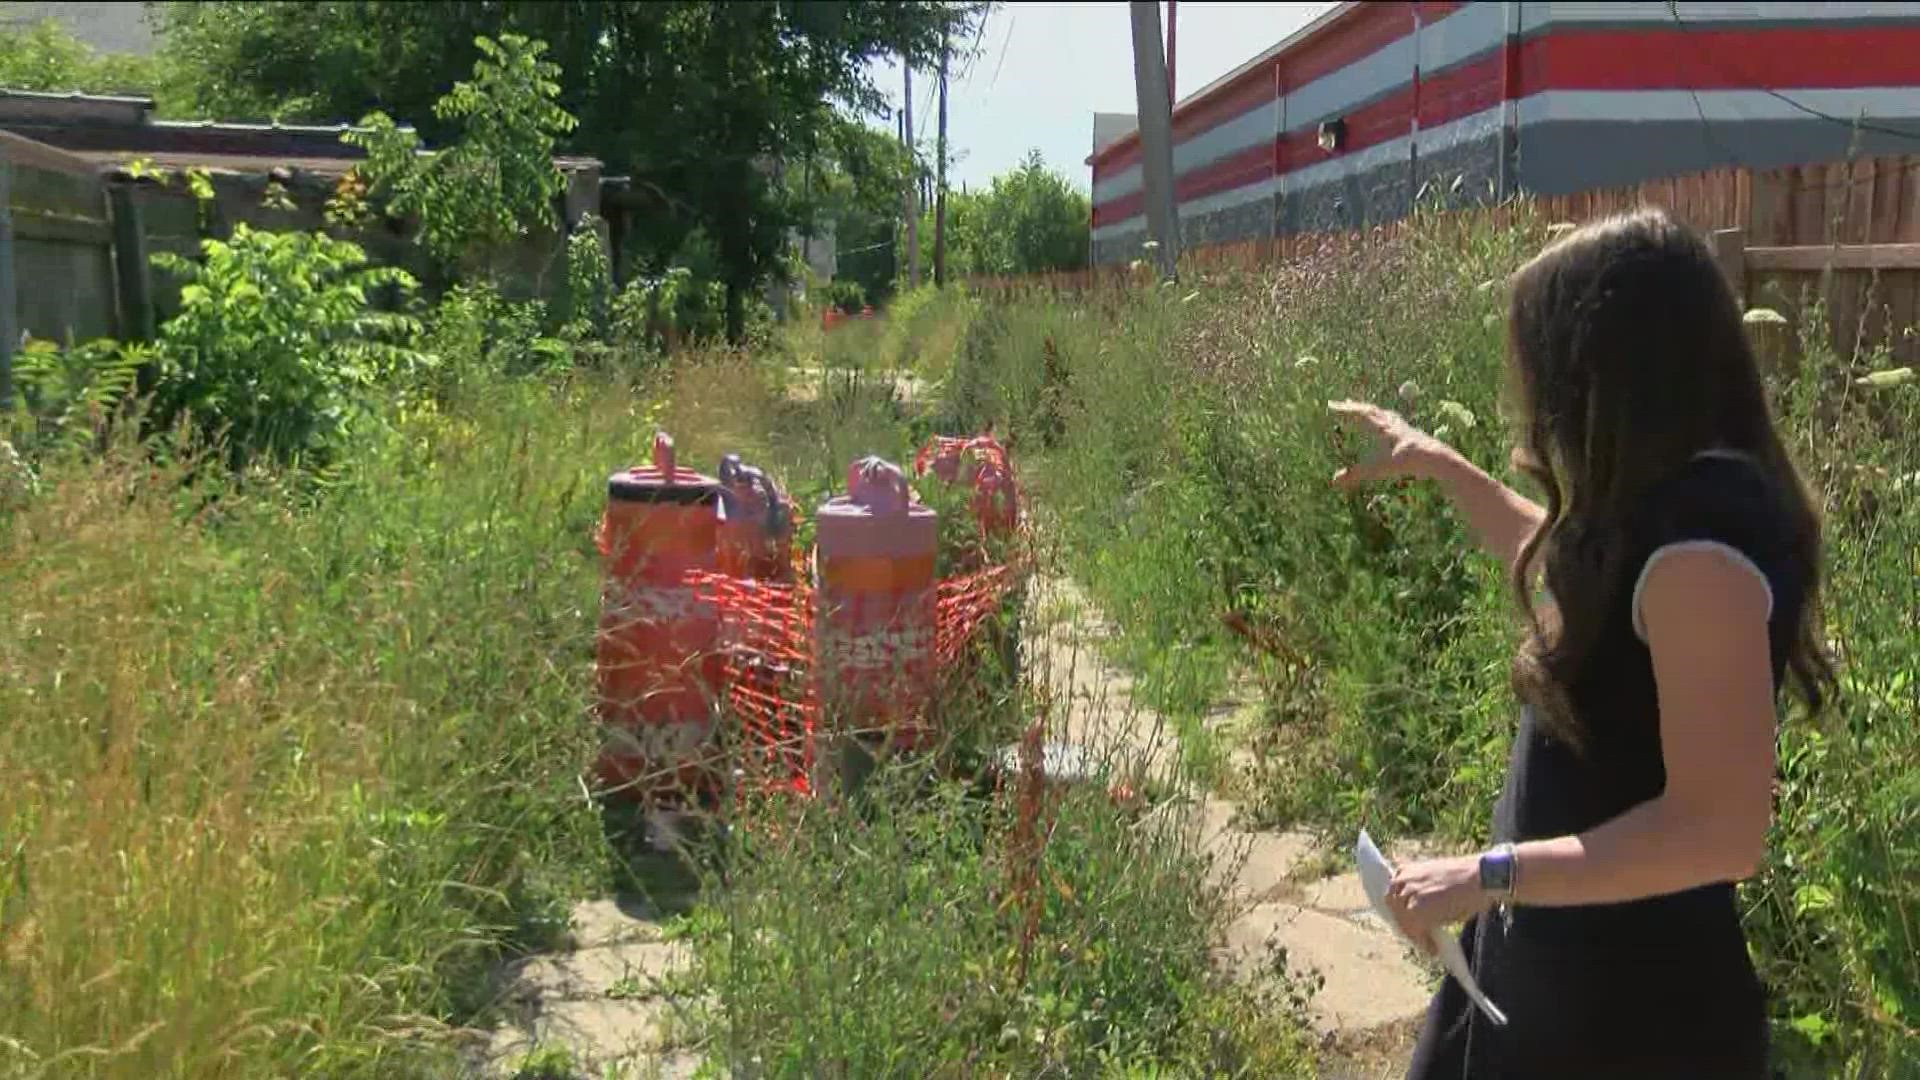 Overgrown weeds, trash and cracked cement fill the alleyway behind several houses. Residents have reached out to the city for help, but so far, nothing has been done